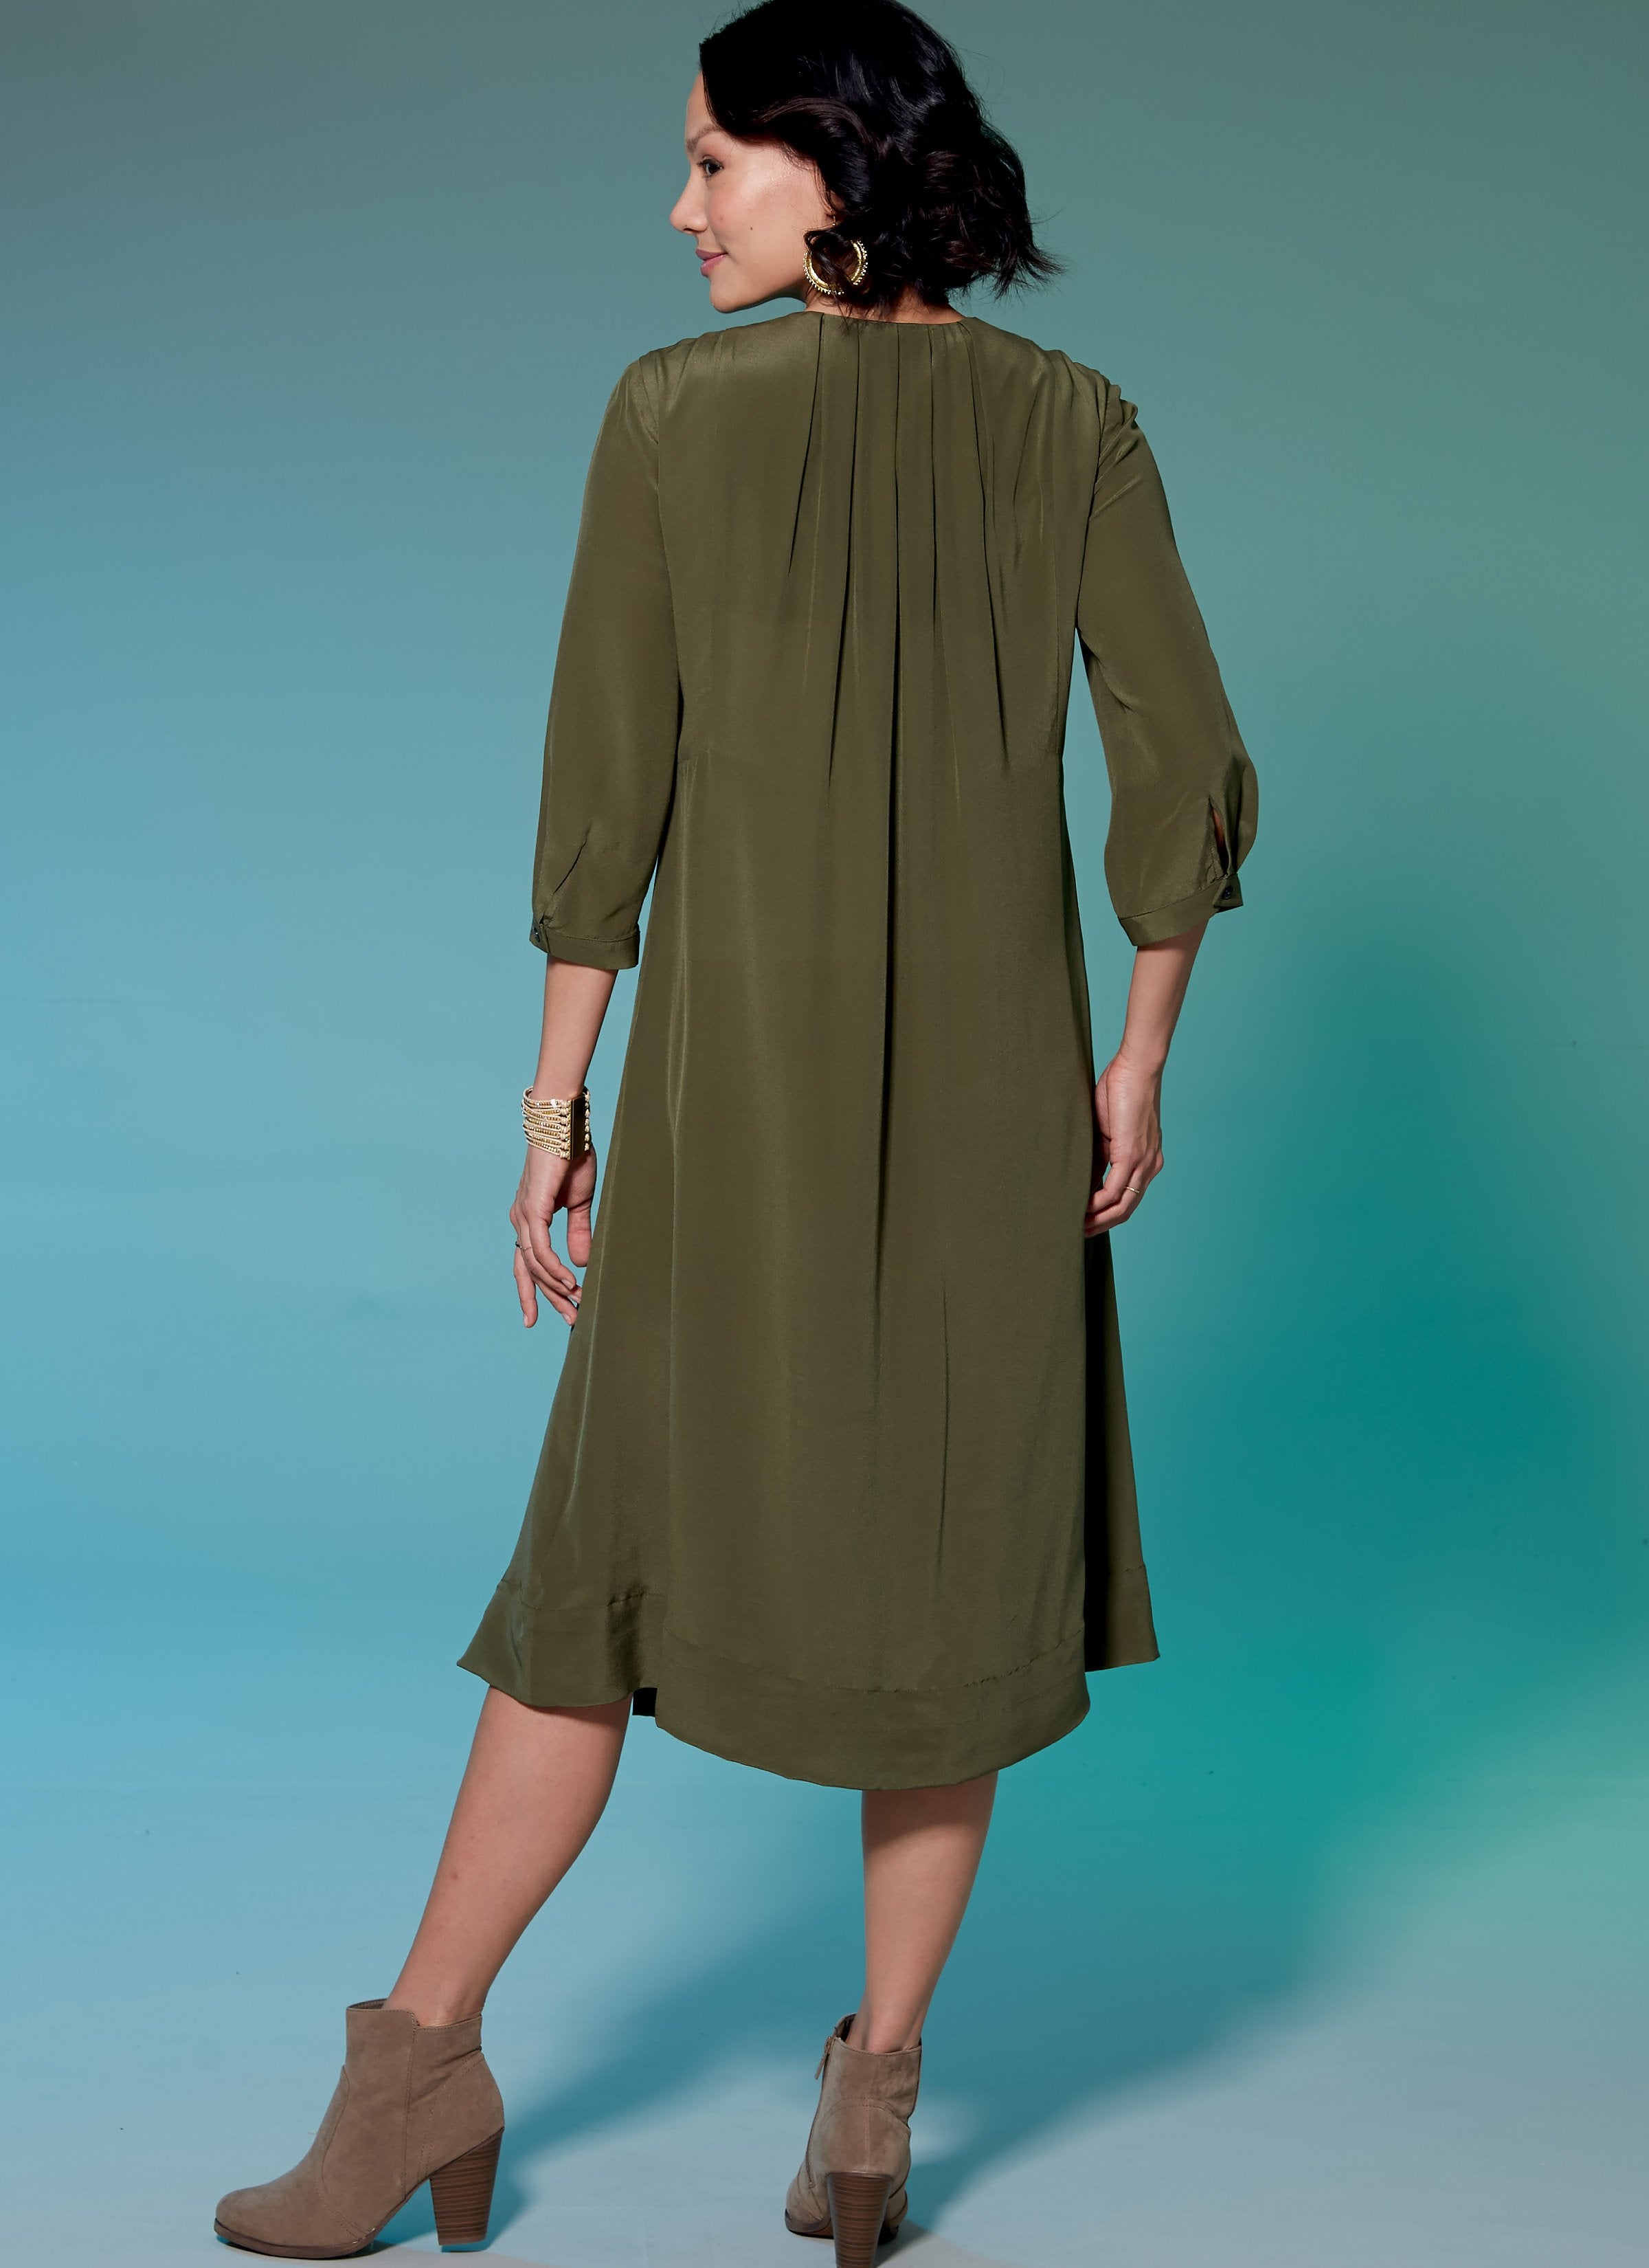 M7650 V-Neck or Square-Neck Top, Tunic, and Dresses from Jaycotts Sewing Supplies